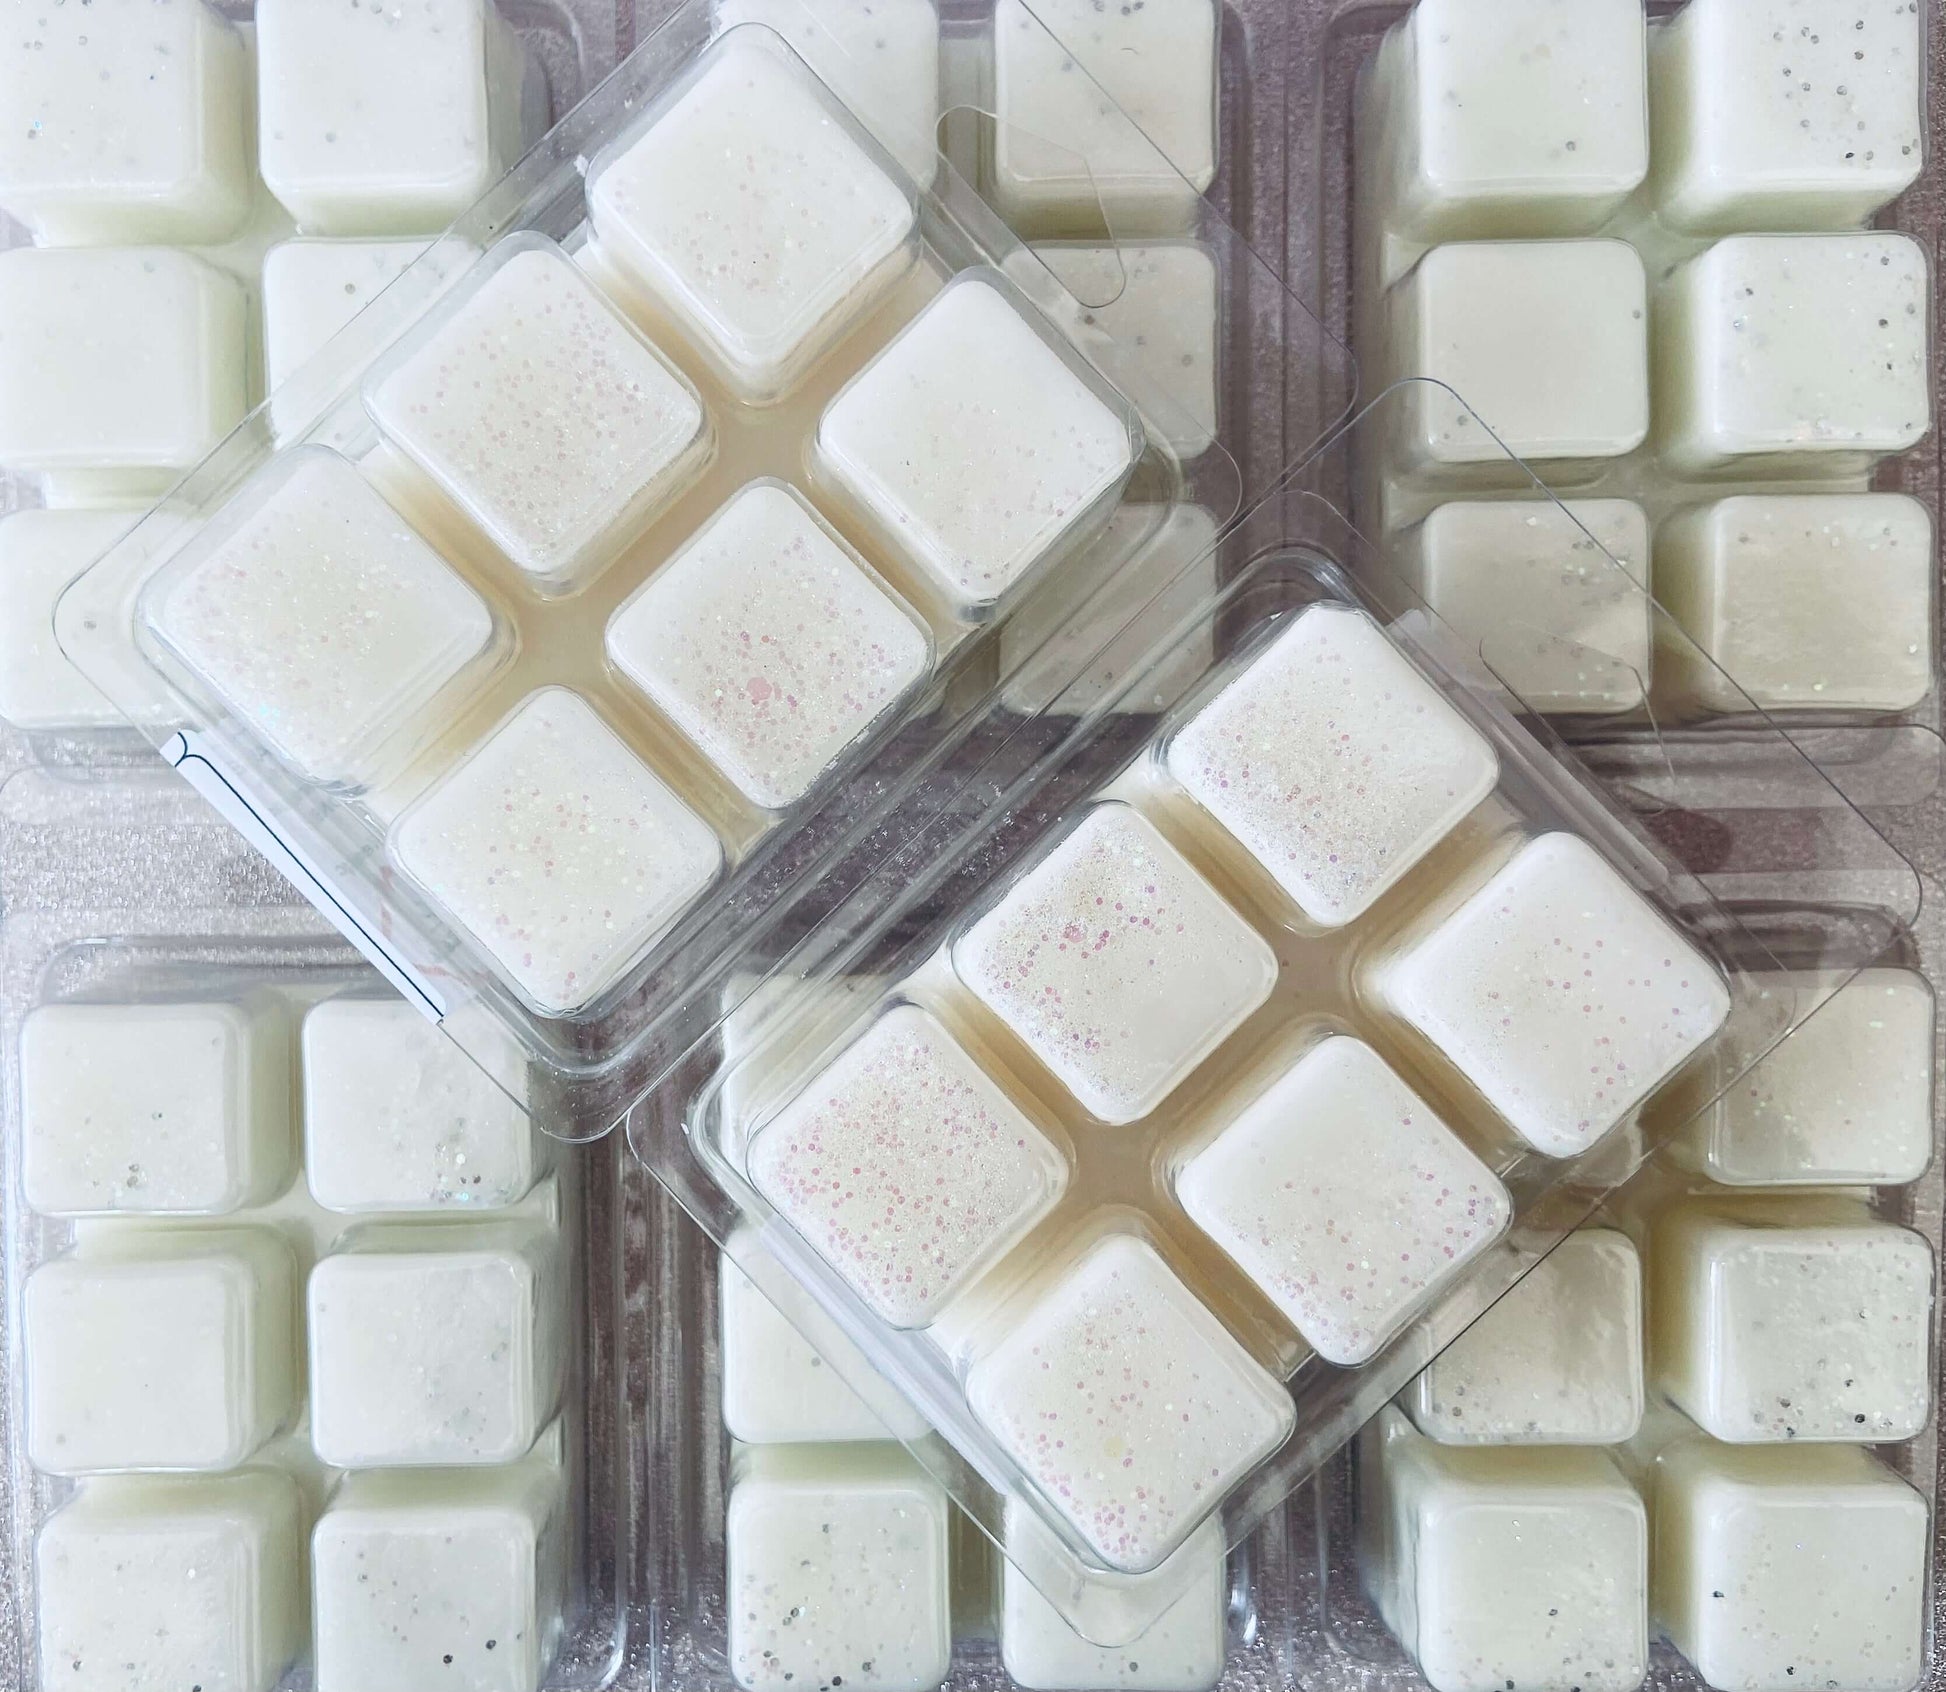 Packaged square mochi desserts arranged neatly in biodegradable glitter-decorated plastic containers of 1000 Wishes Wax Melt by The Soap Gal x.